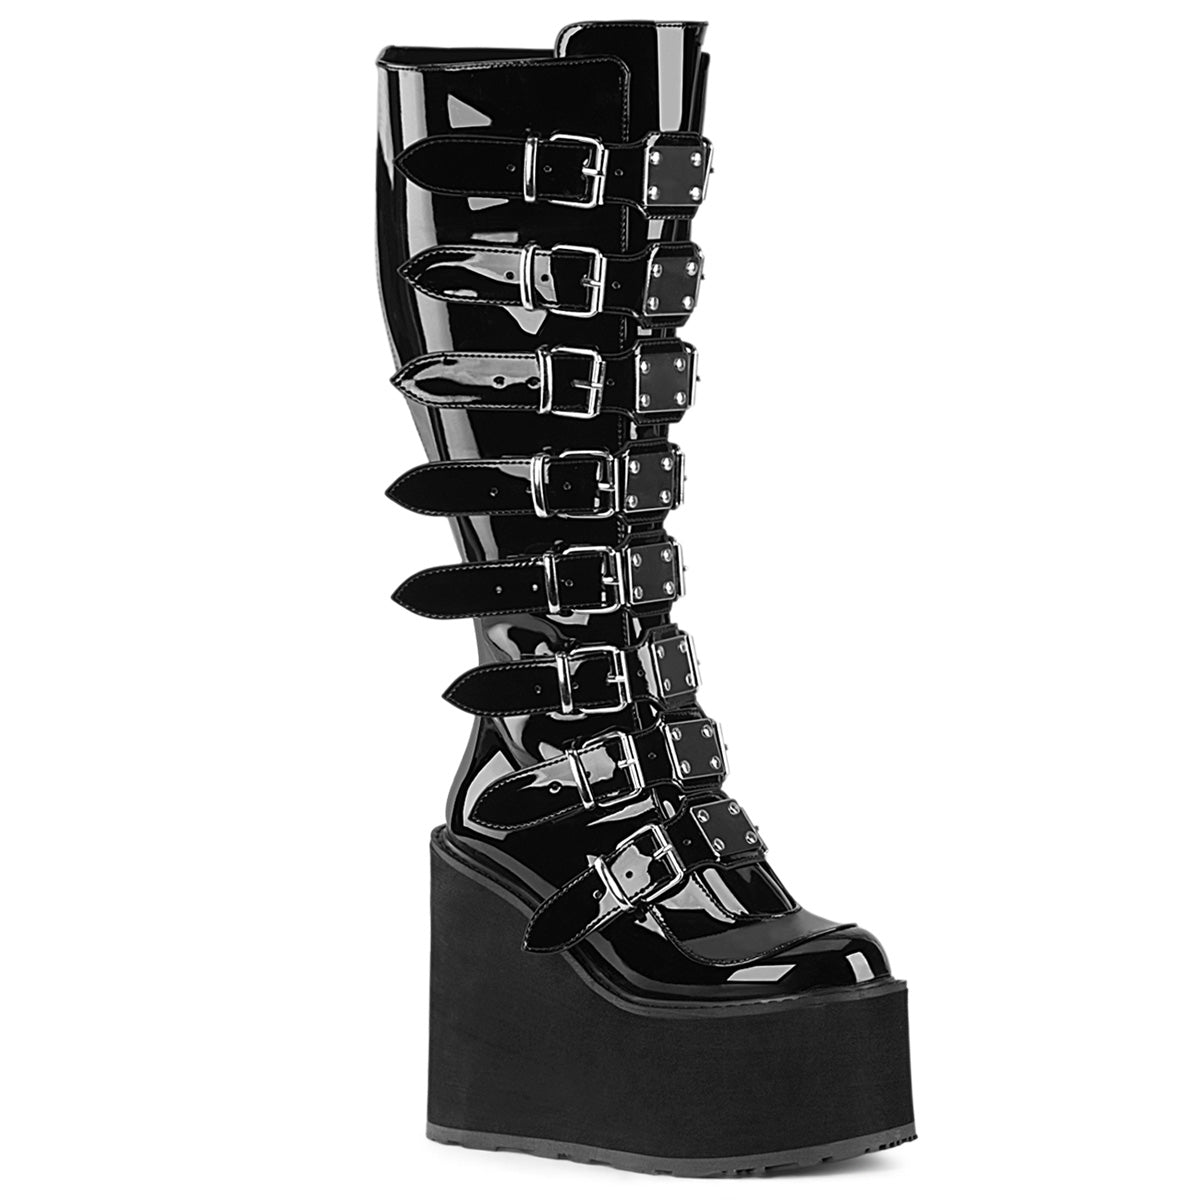 Too Fast | Demonia Swing 815 Wc | Black Patent Leather Women&#39;s Knee High Boots